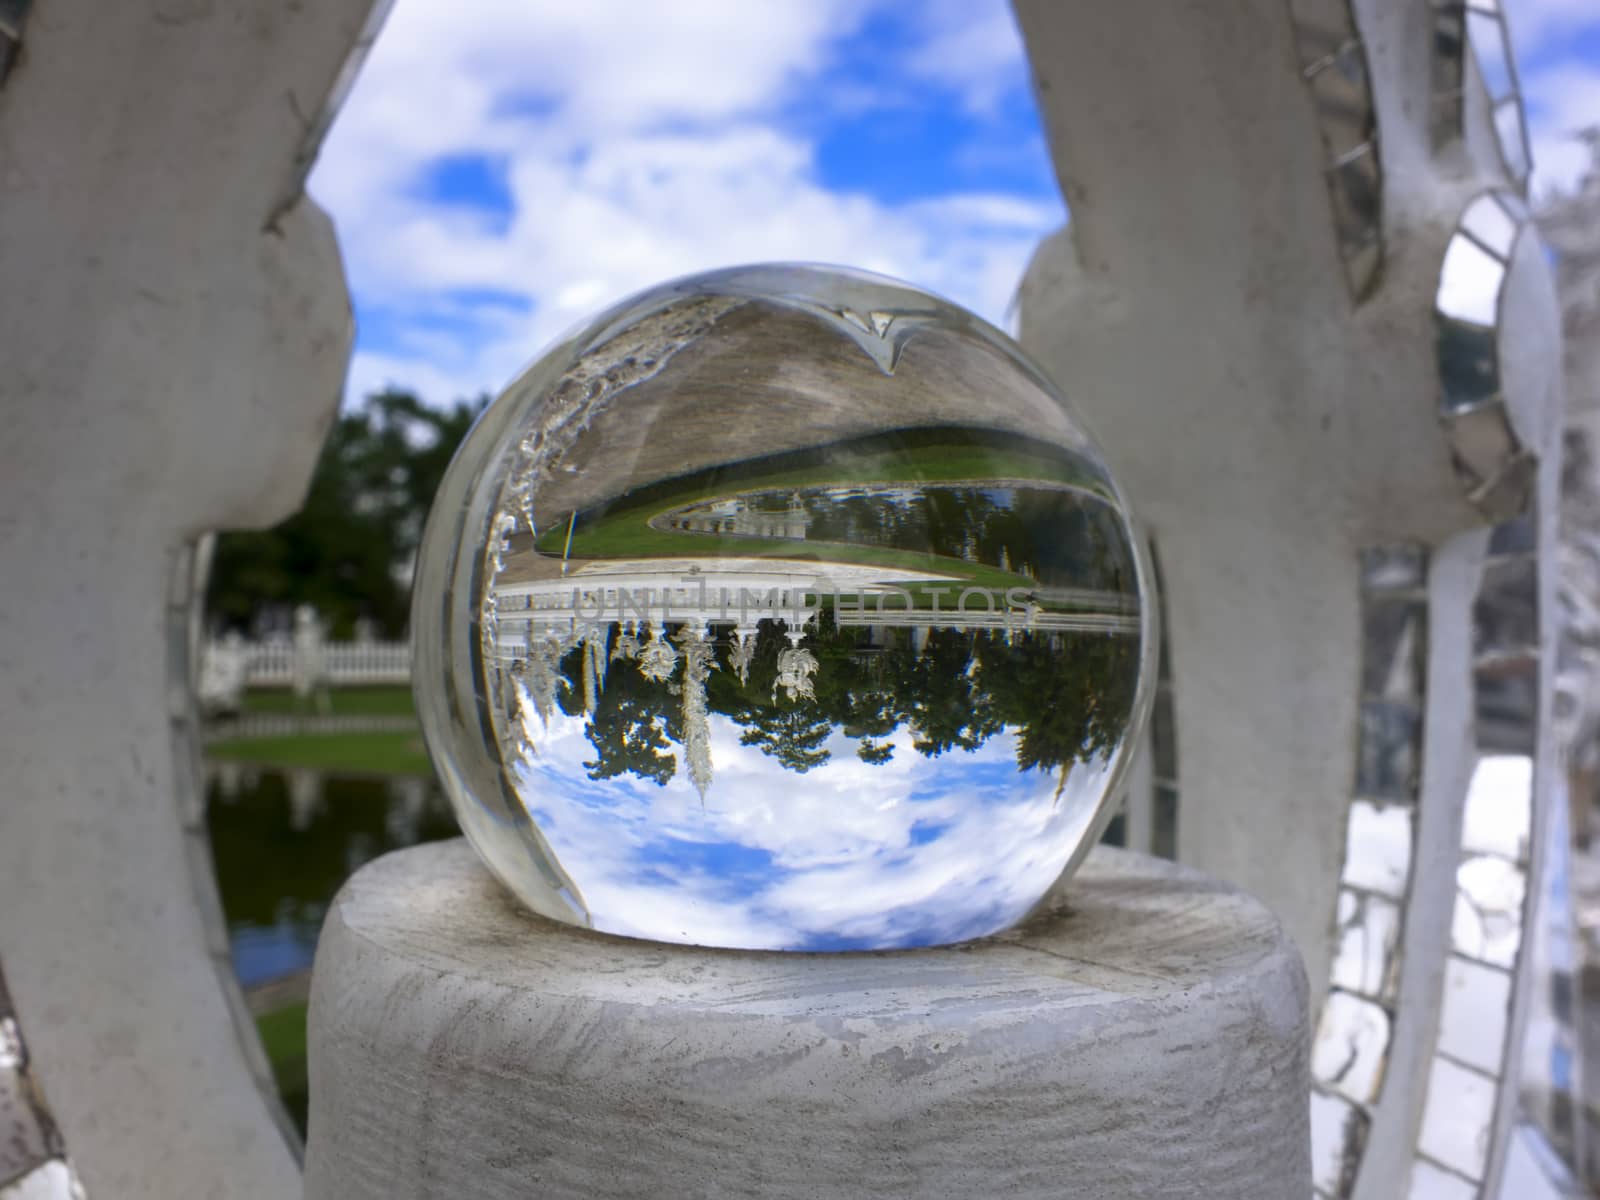 Pond in Magic Ball of Wat Rong Khun. Buddhist temple in Chiang Rai, Thailand.